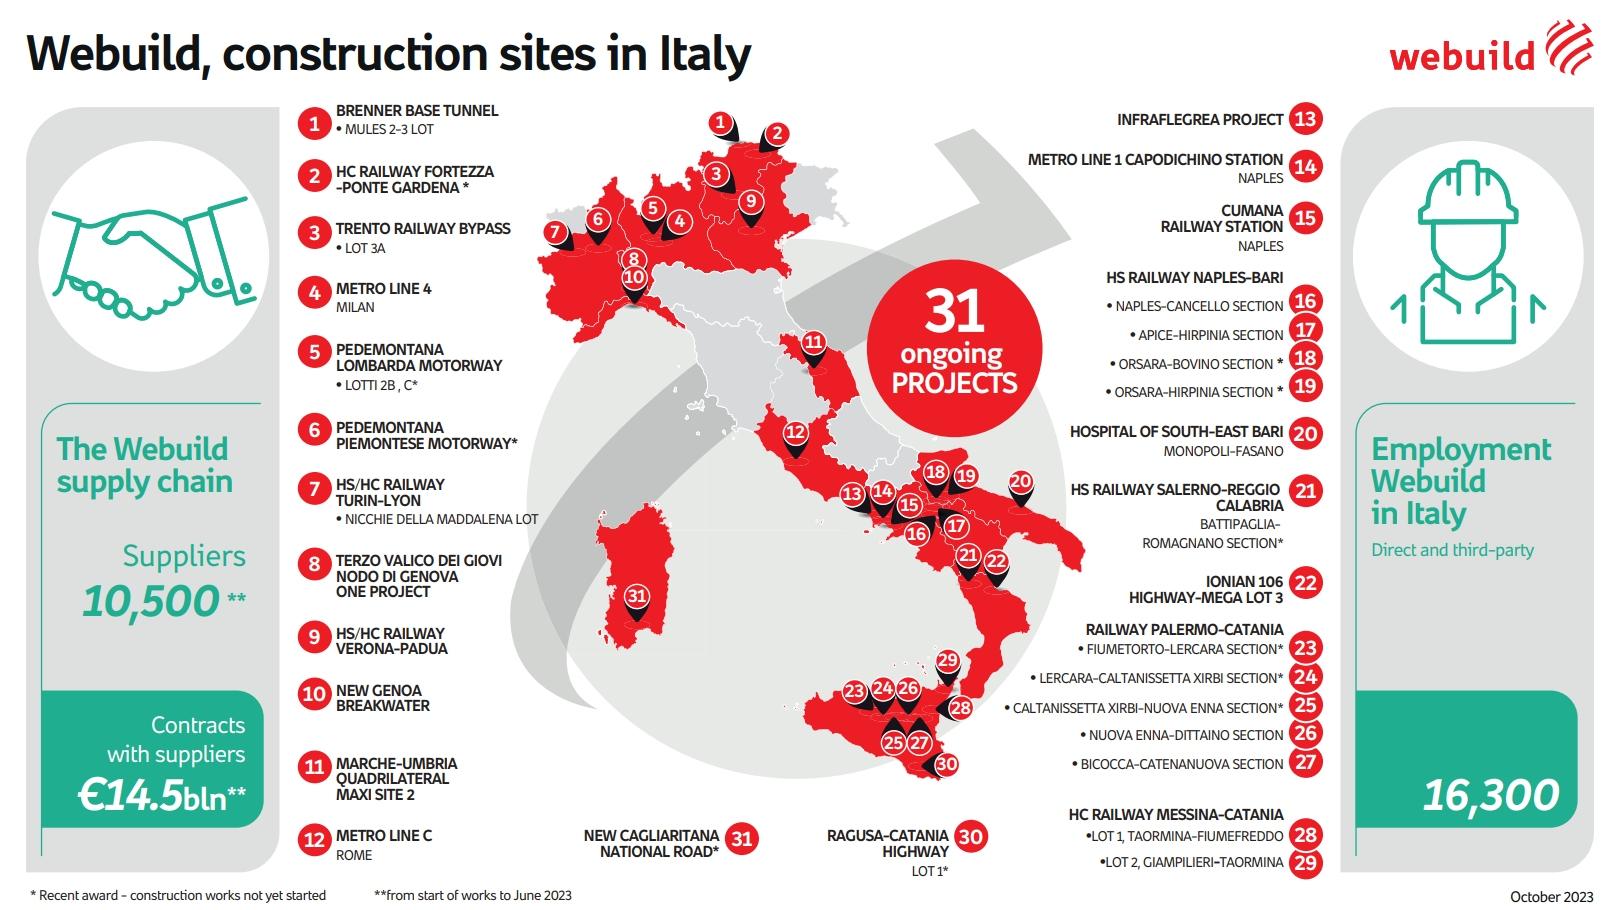 Webuild, construction sites in Italy